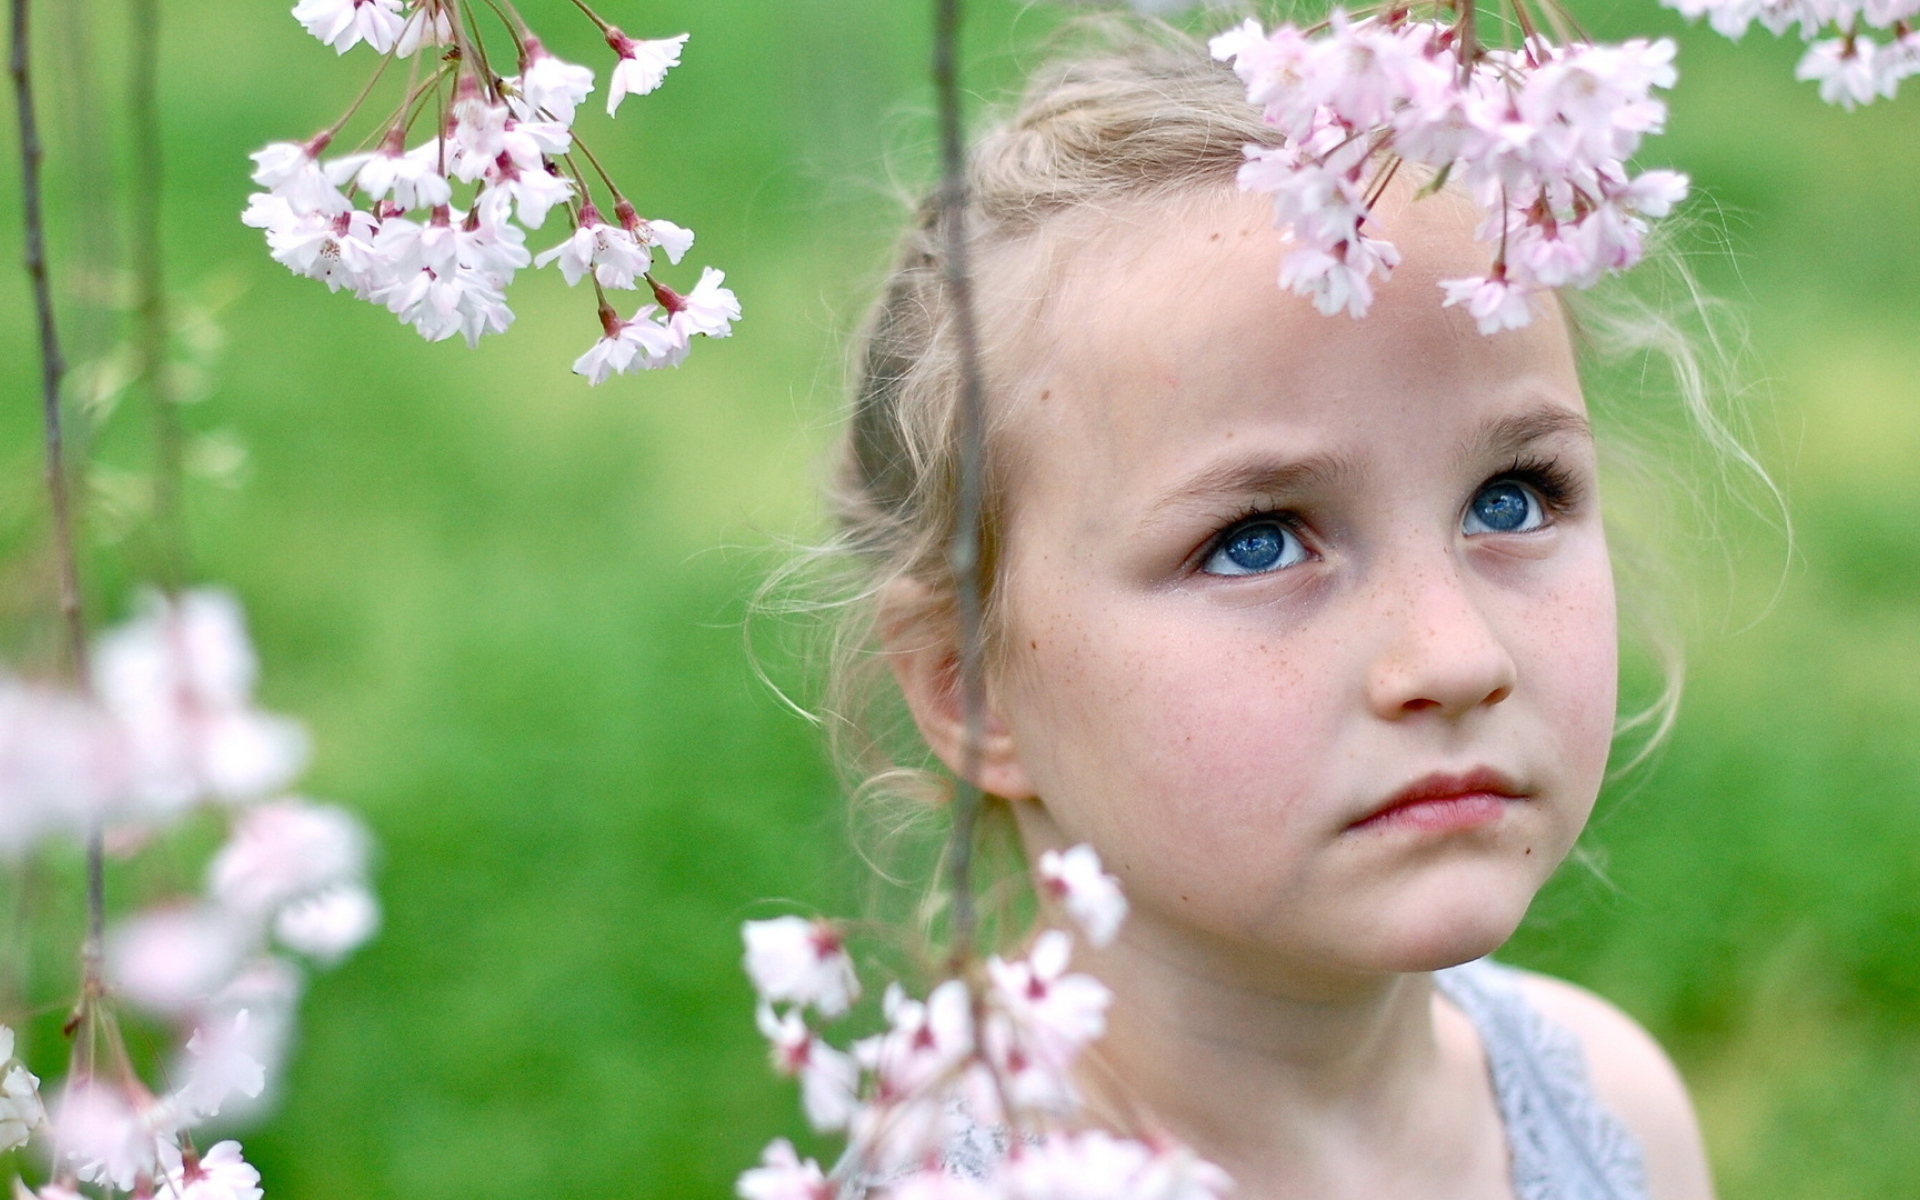 A little blue-eyed girl with branches of spring flowers